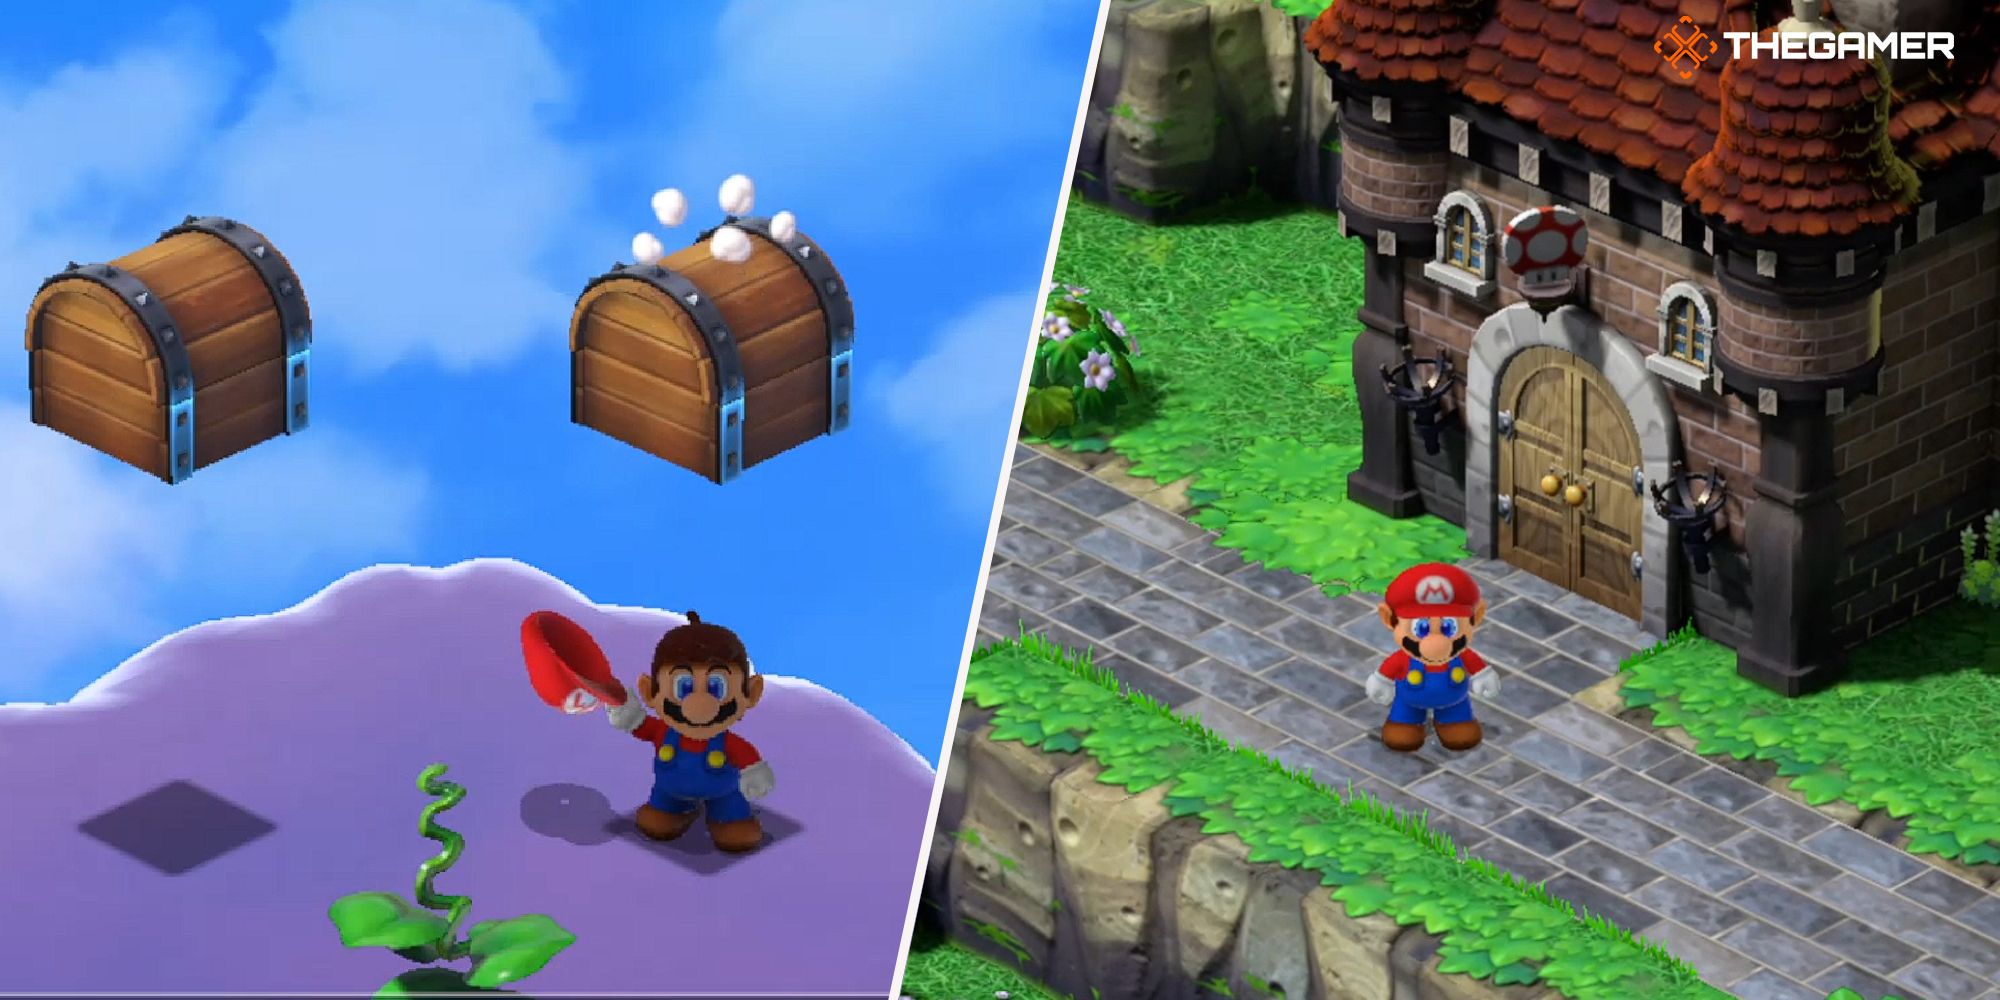 Super Mario RPG Mario Finding The Lazy Shell And Getting Into A Shop